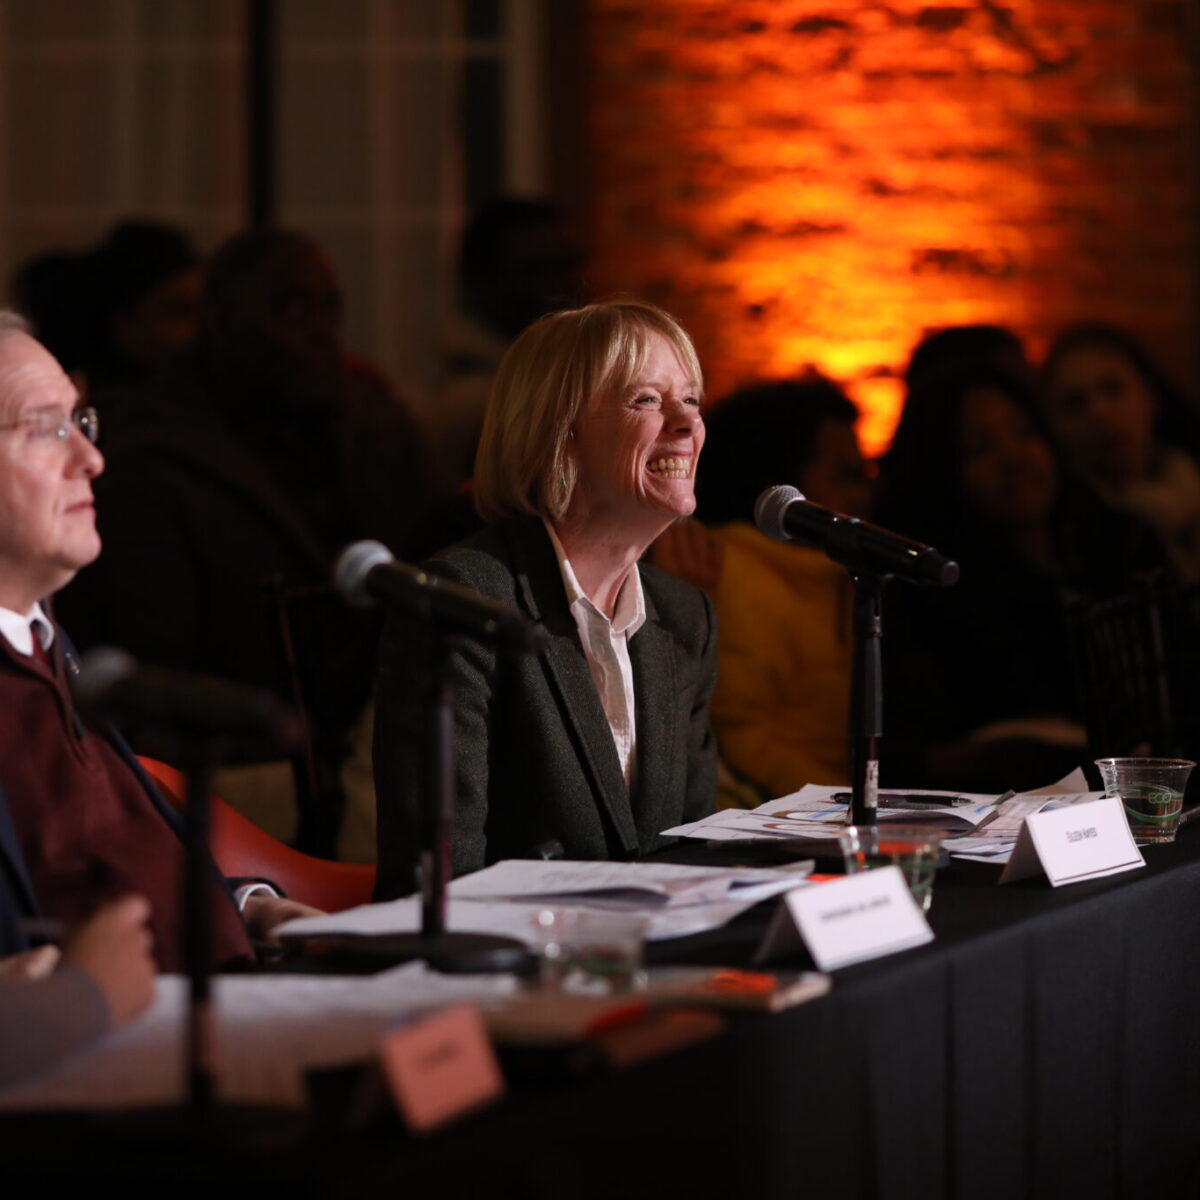 Congressman James Langevin, Eileen Hayes, president and CEO of Amos House, and Maria Kasparian, executive director of Edesia, judge the final pitches.